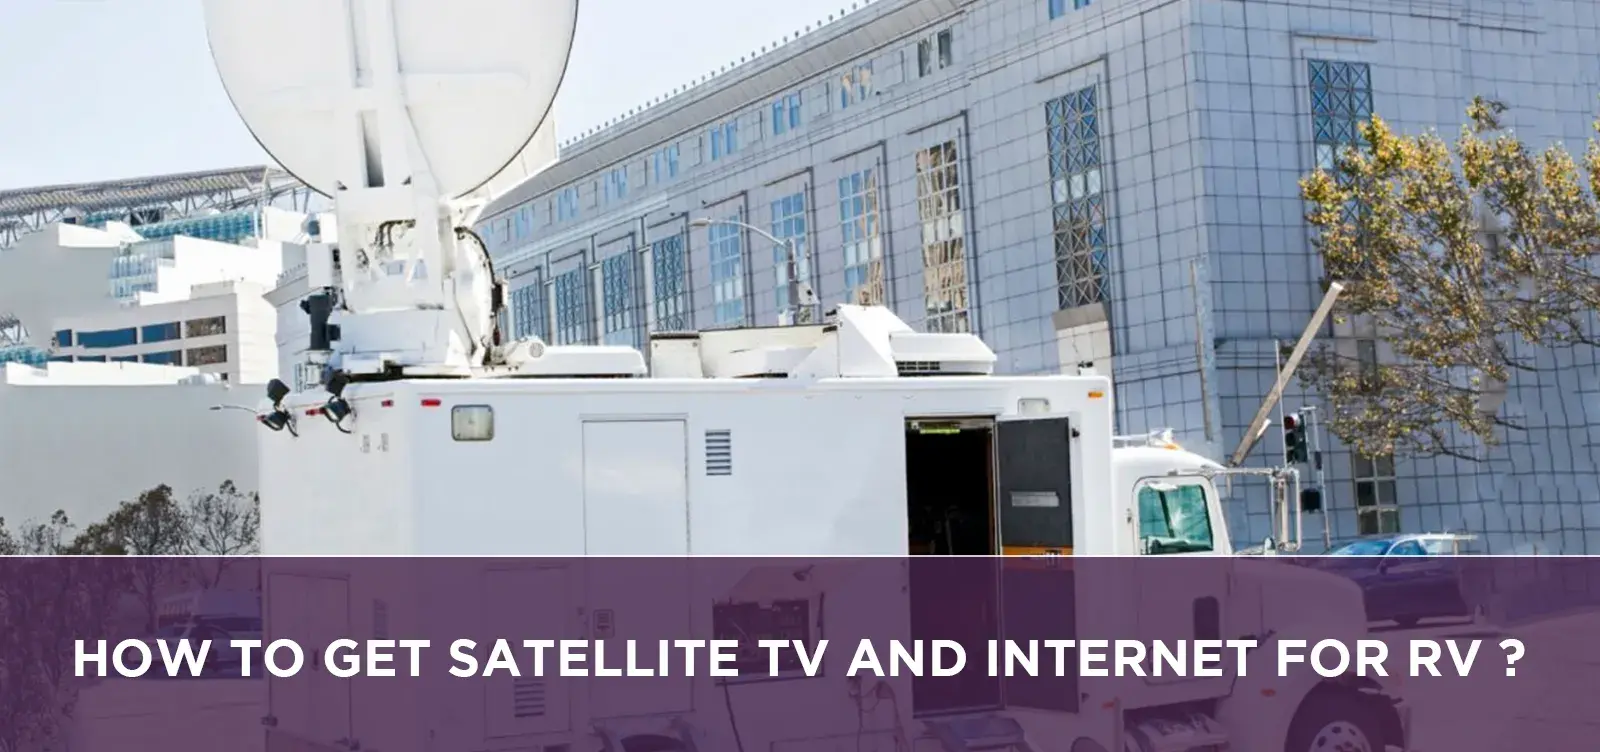 How to get satellite tv and internet for rv?